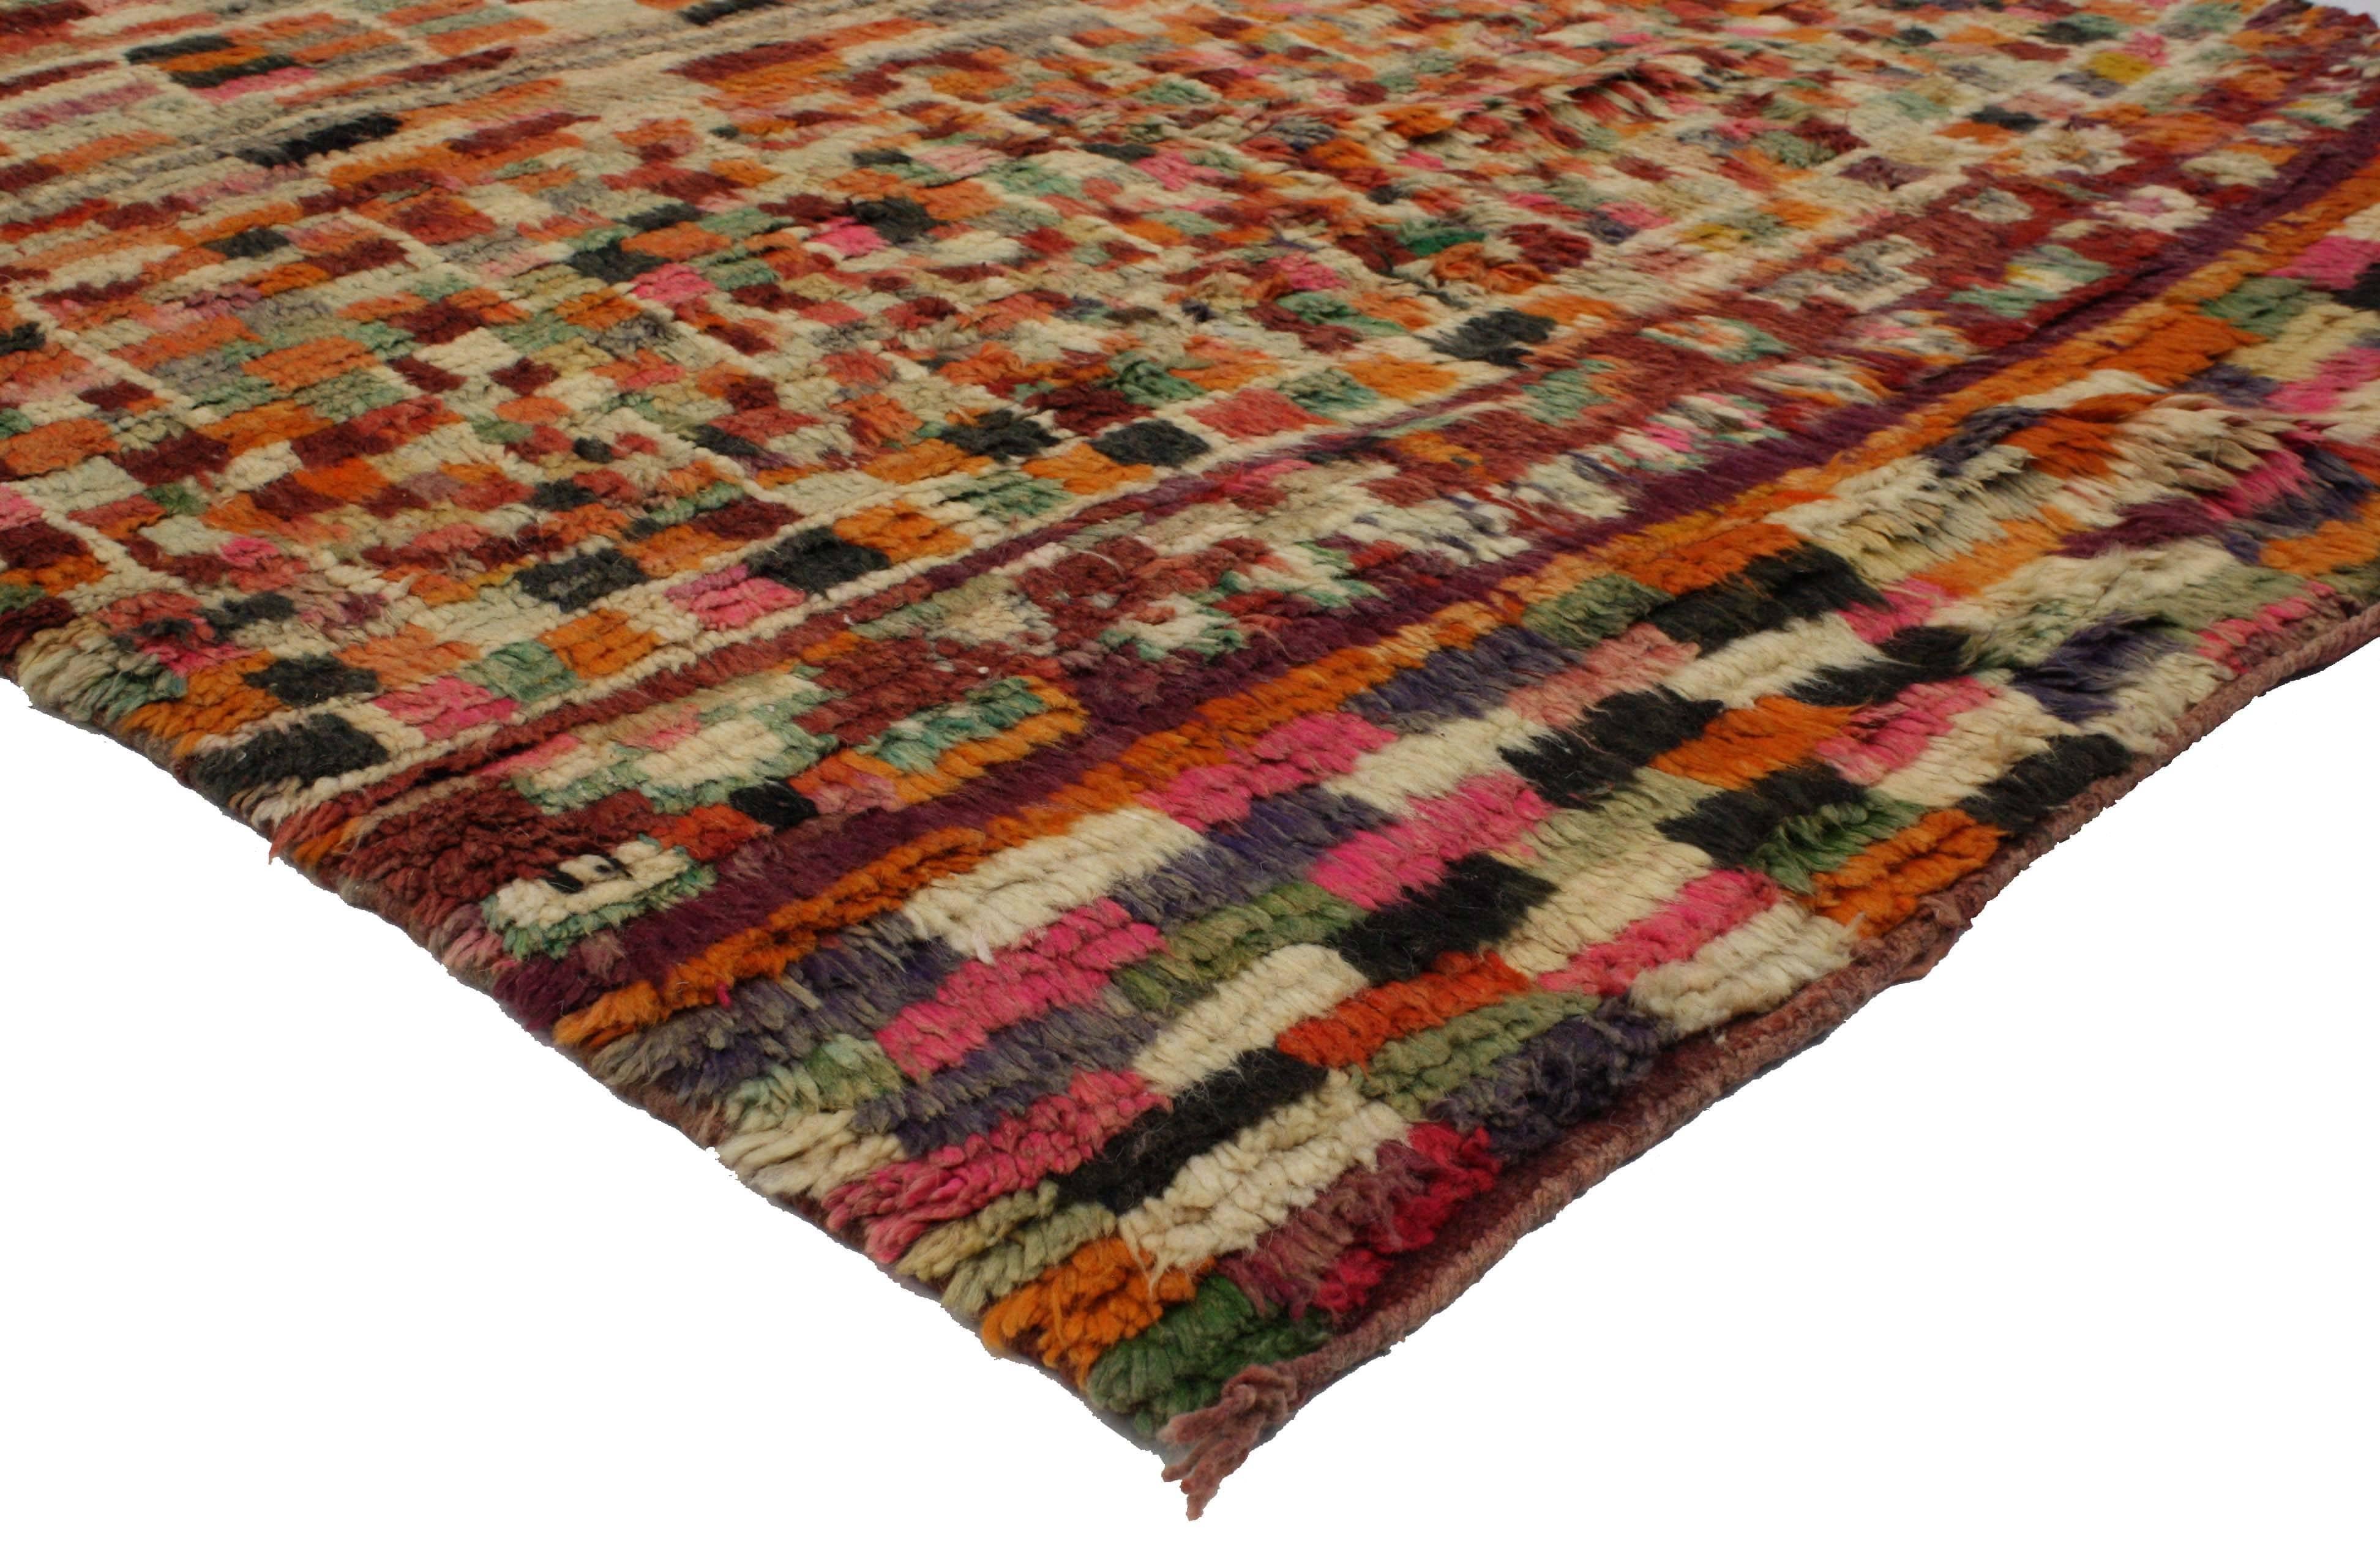 20292 Vintage Berber Moroccan Rehamna Rug with Post-Modern, Bauhaus Cubism Style. This hand-knotted wool vintage Berber Moroccan Rehamna rug composed of asymmetrical square blocks and irregular cubes forming a cohesive composition. This vintage